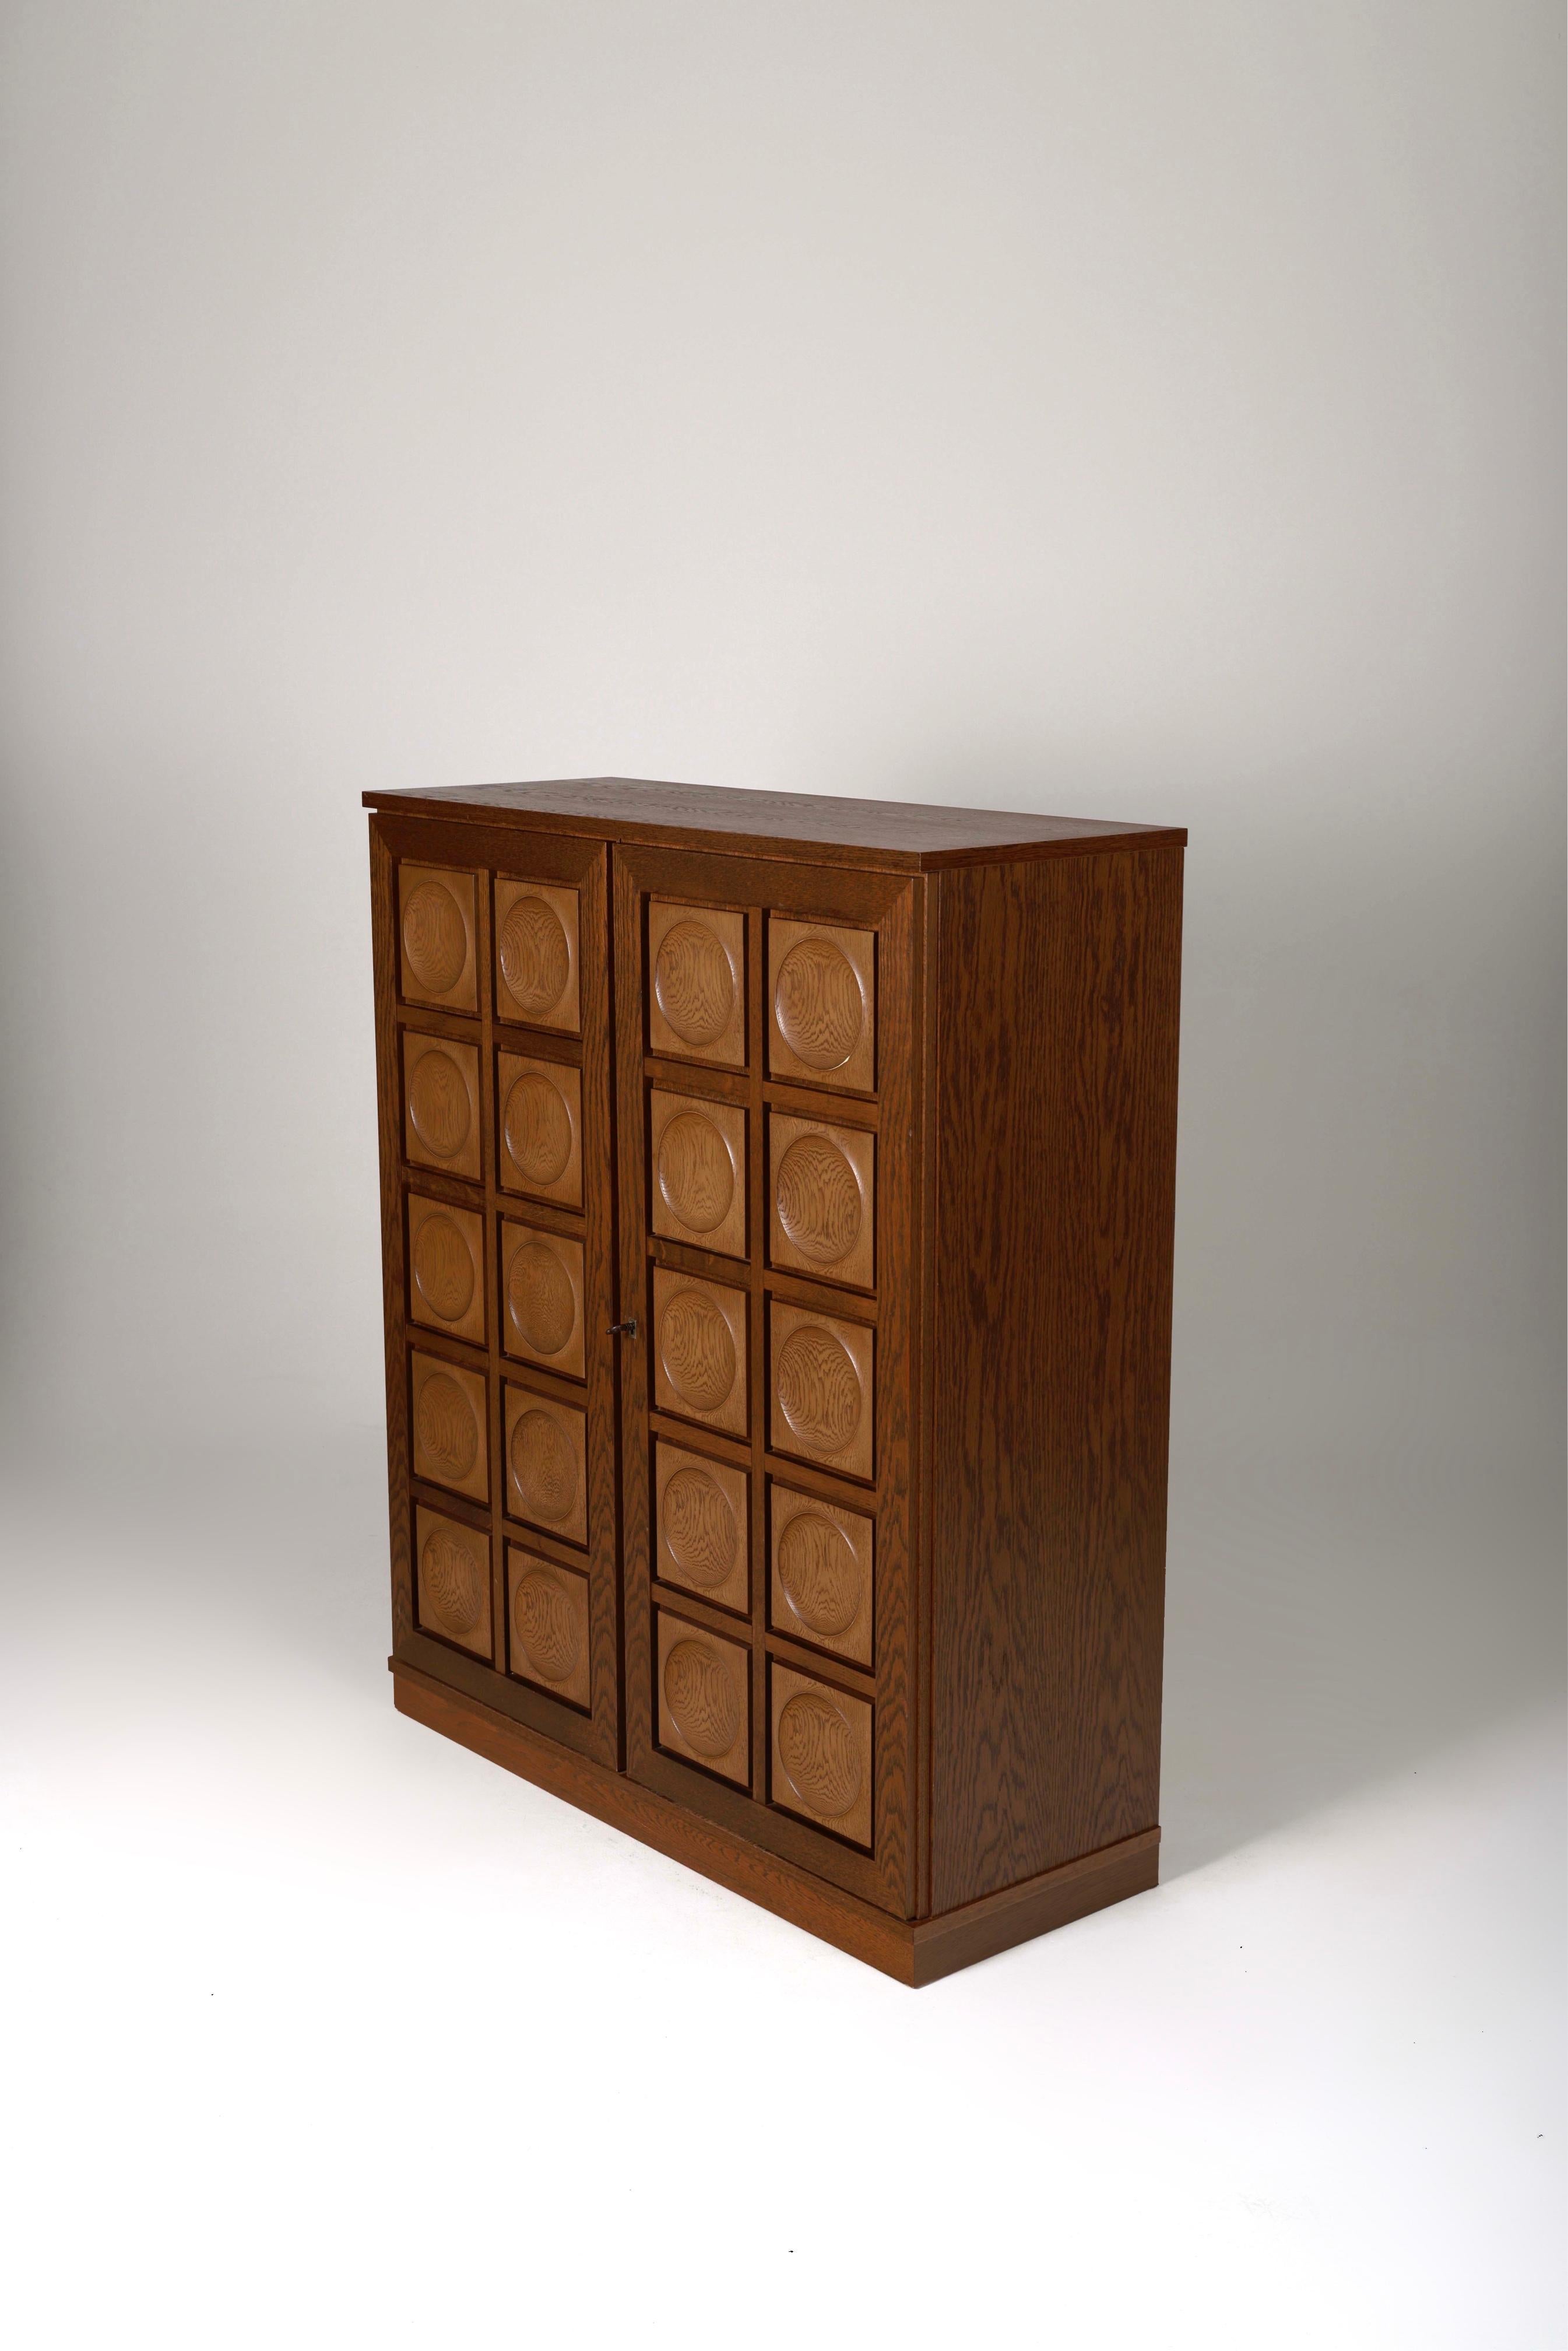 Brutalist chest of drawers by Belgian designer Gerhard Bartels, 1970s. Oak storage unit with two doors featuring circular sculpted motifs and four shelves inside.
LP1103